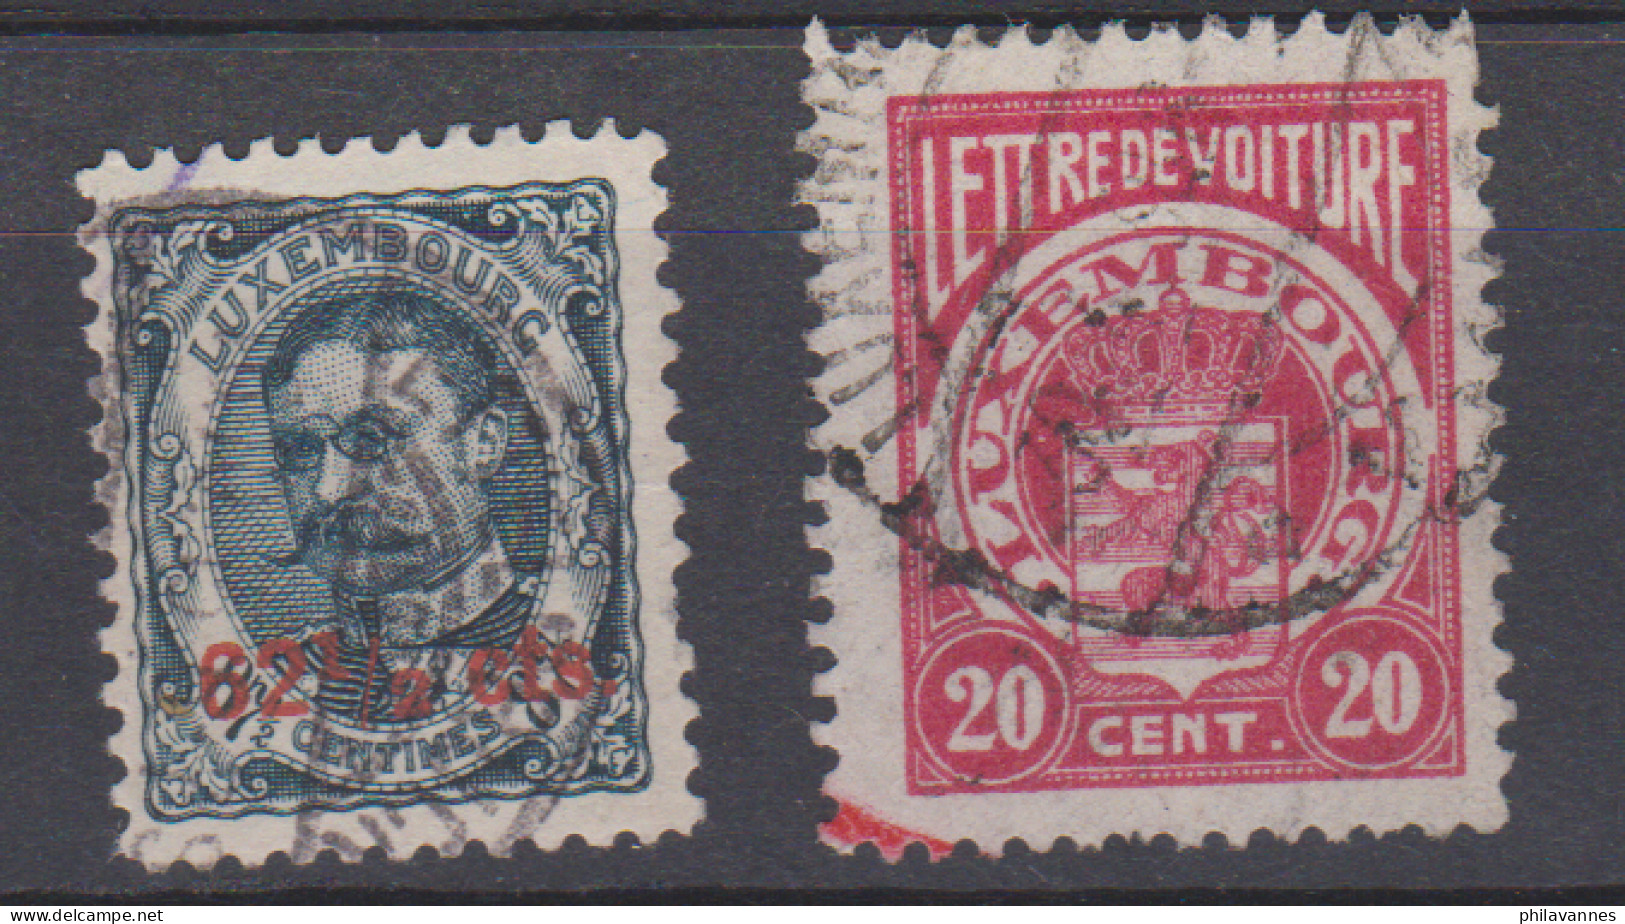 Luxembourg,n° 86 ( Lux/ 1.6) - 1906 William IV